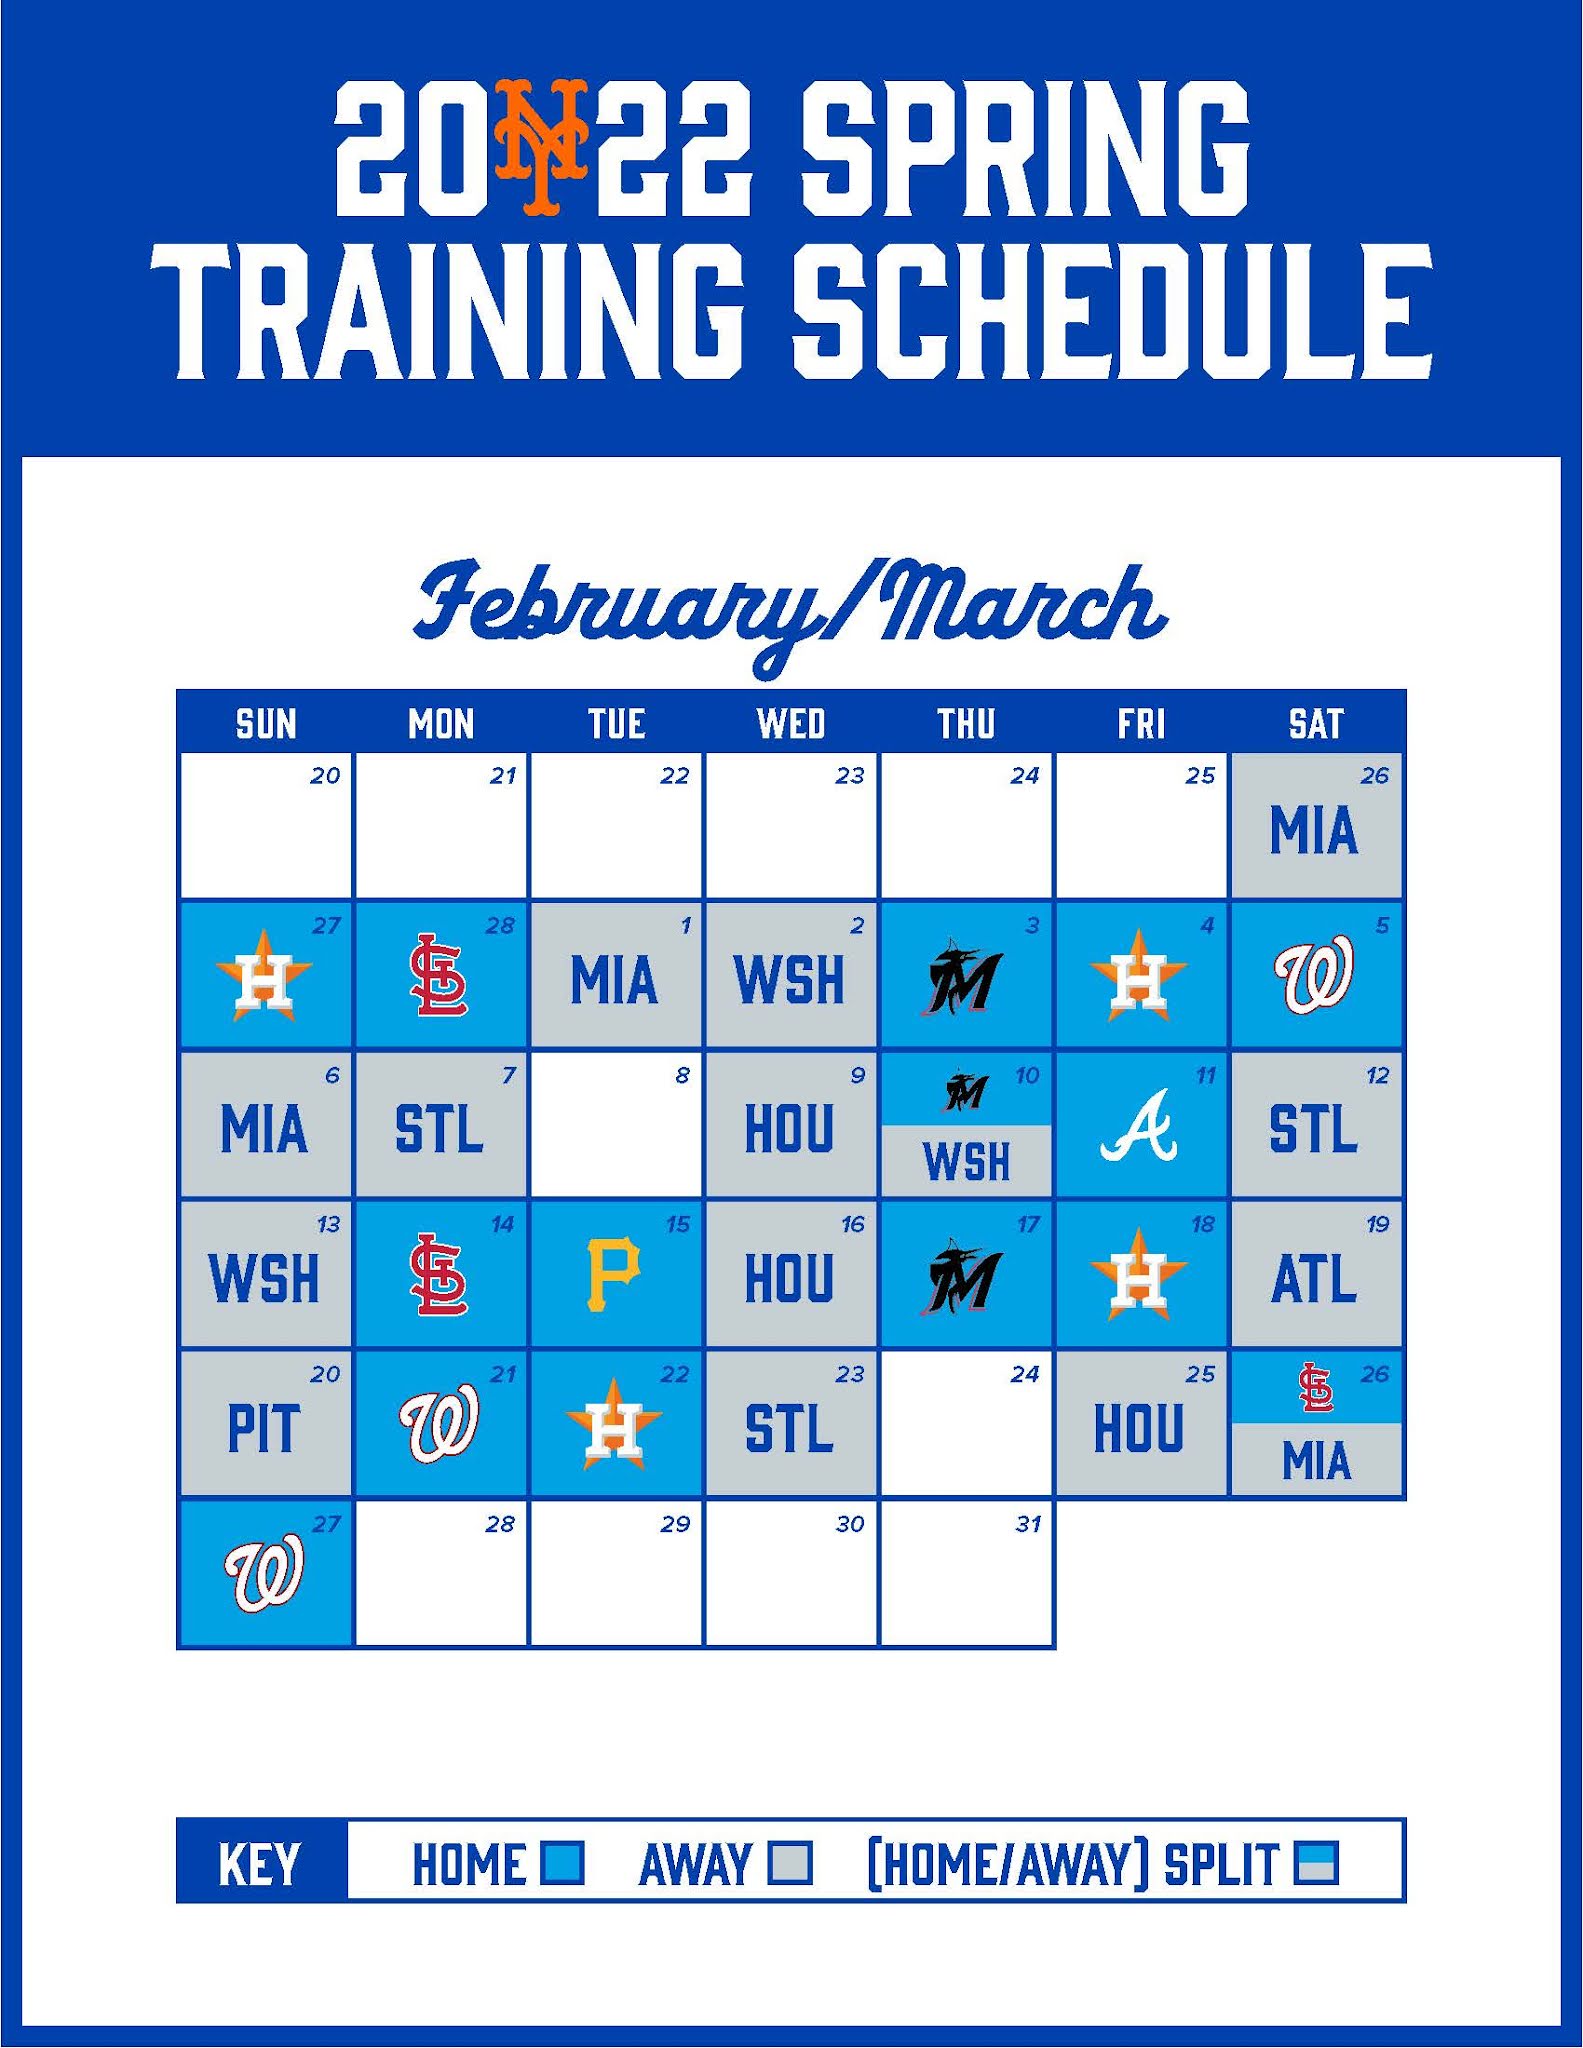 SNY announces 2021 Mets spring training TV schedule and coverage